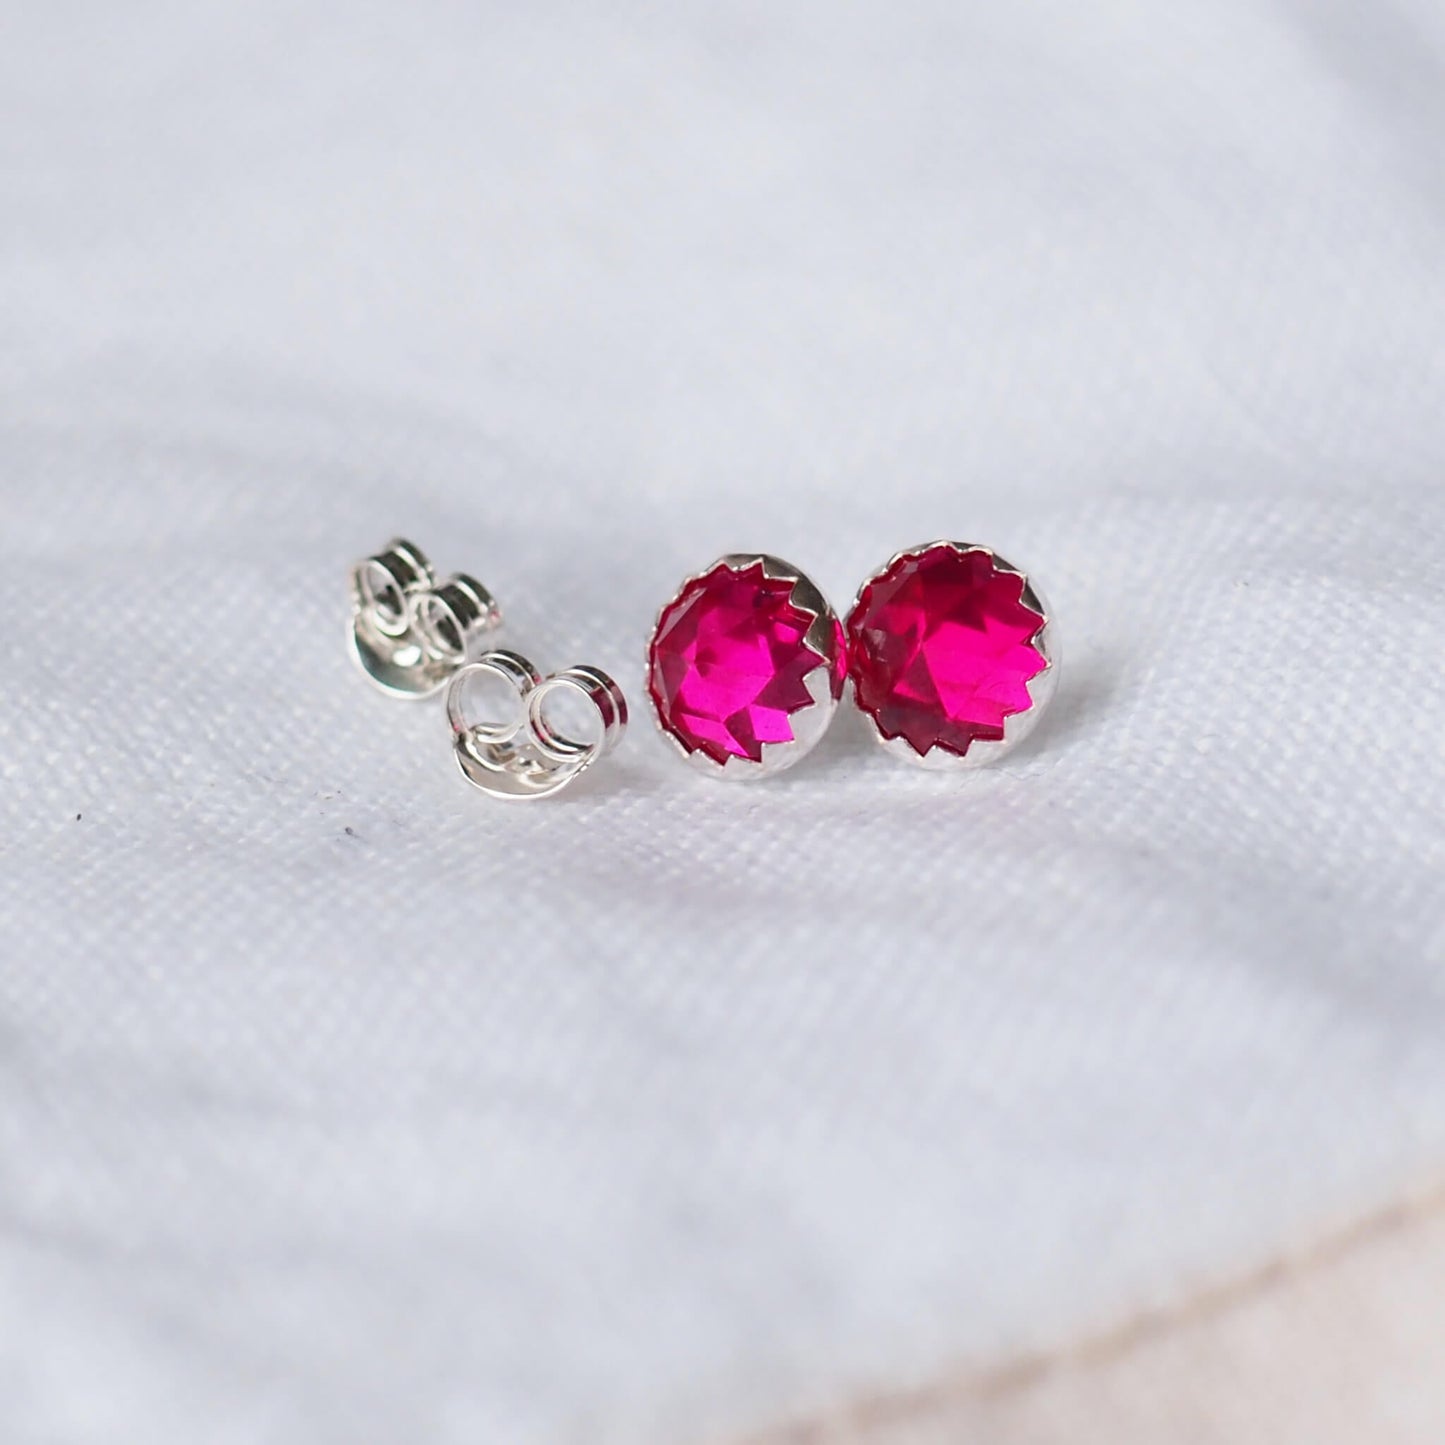 July Birthstone earrings featuring hot pink Gemstone stud earrings with a bright lab ruby artificial gemstone, round and faceted 6m in size. Set onto Sterling Silver settings. Birthstone for July Handmade in Scotland UK by maram jewellery